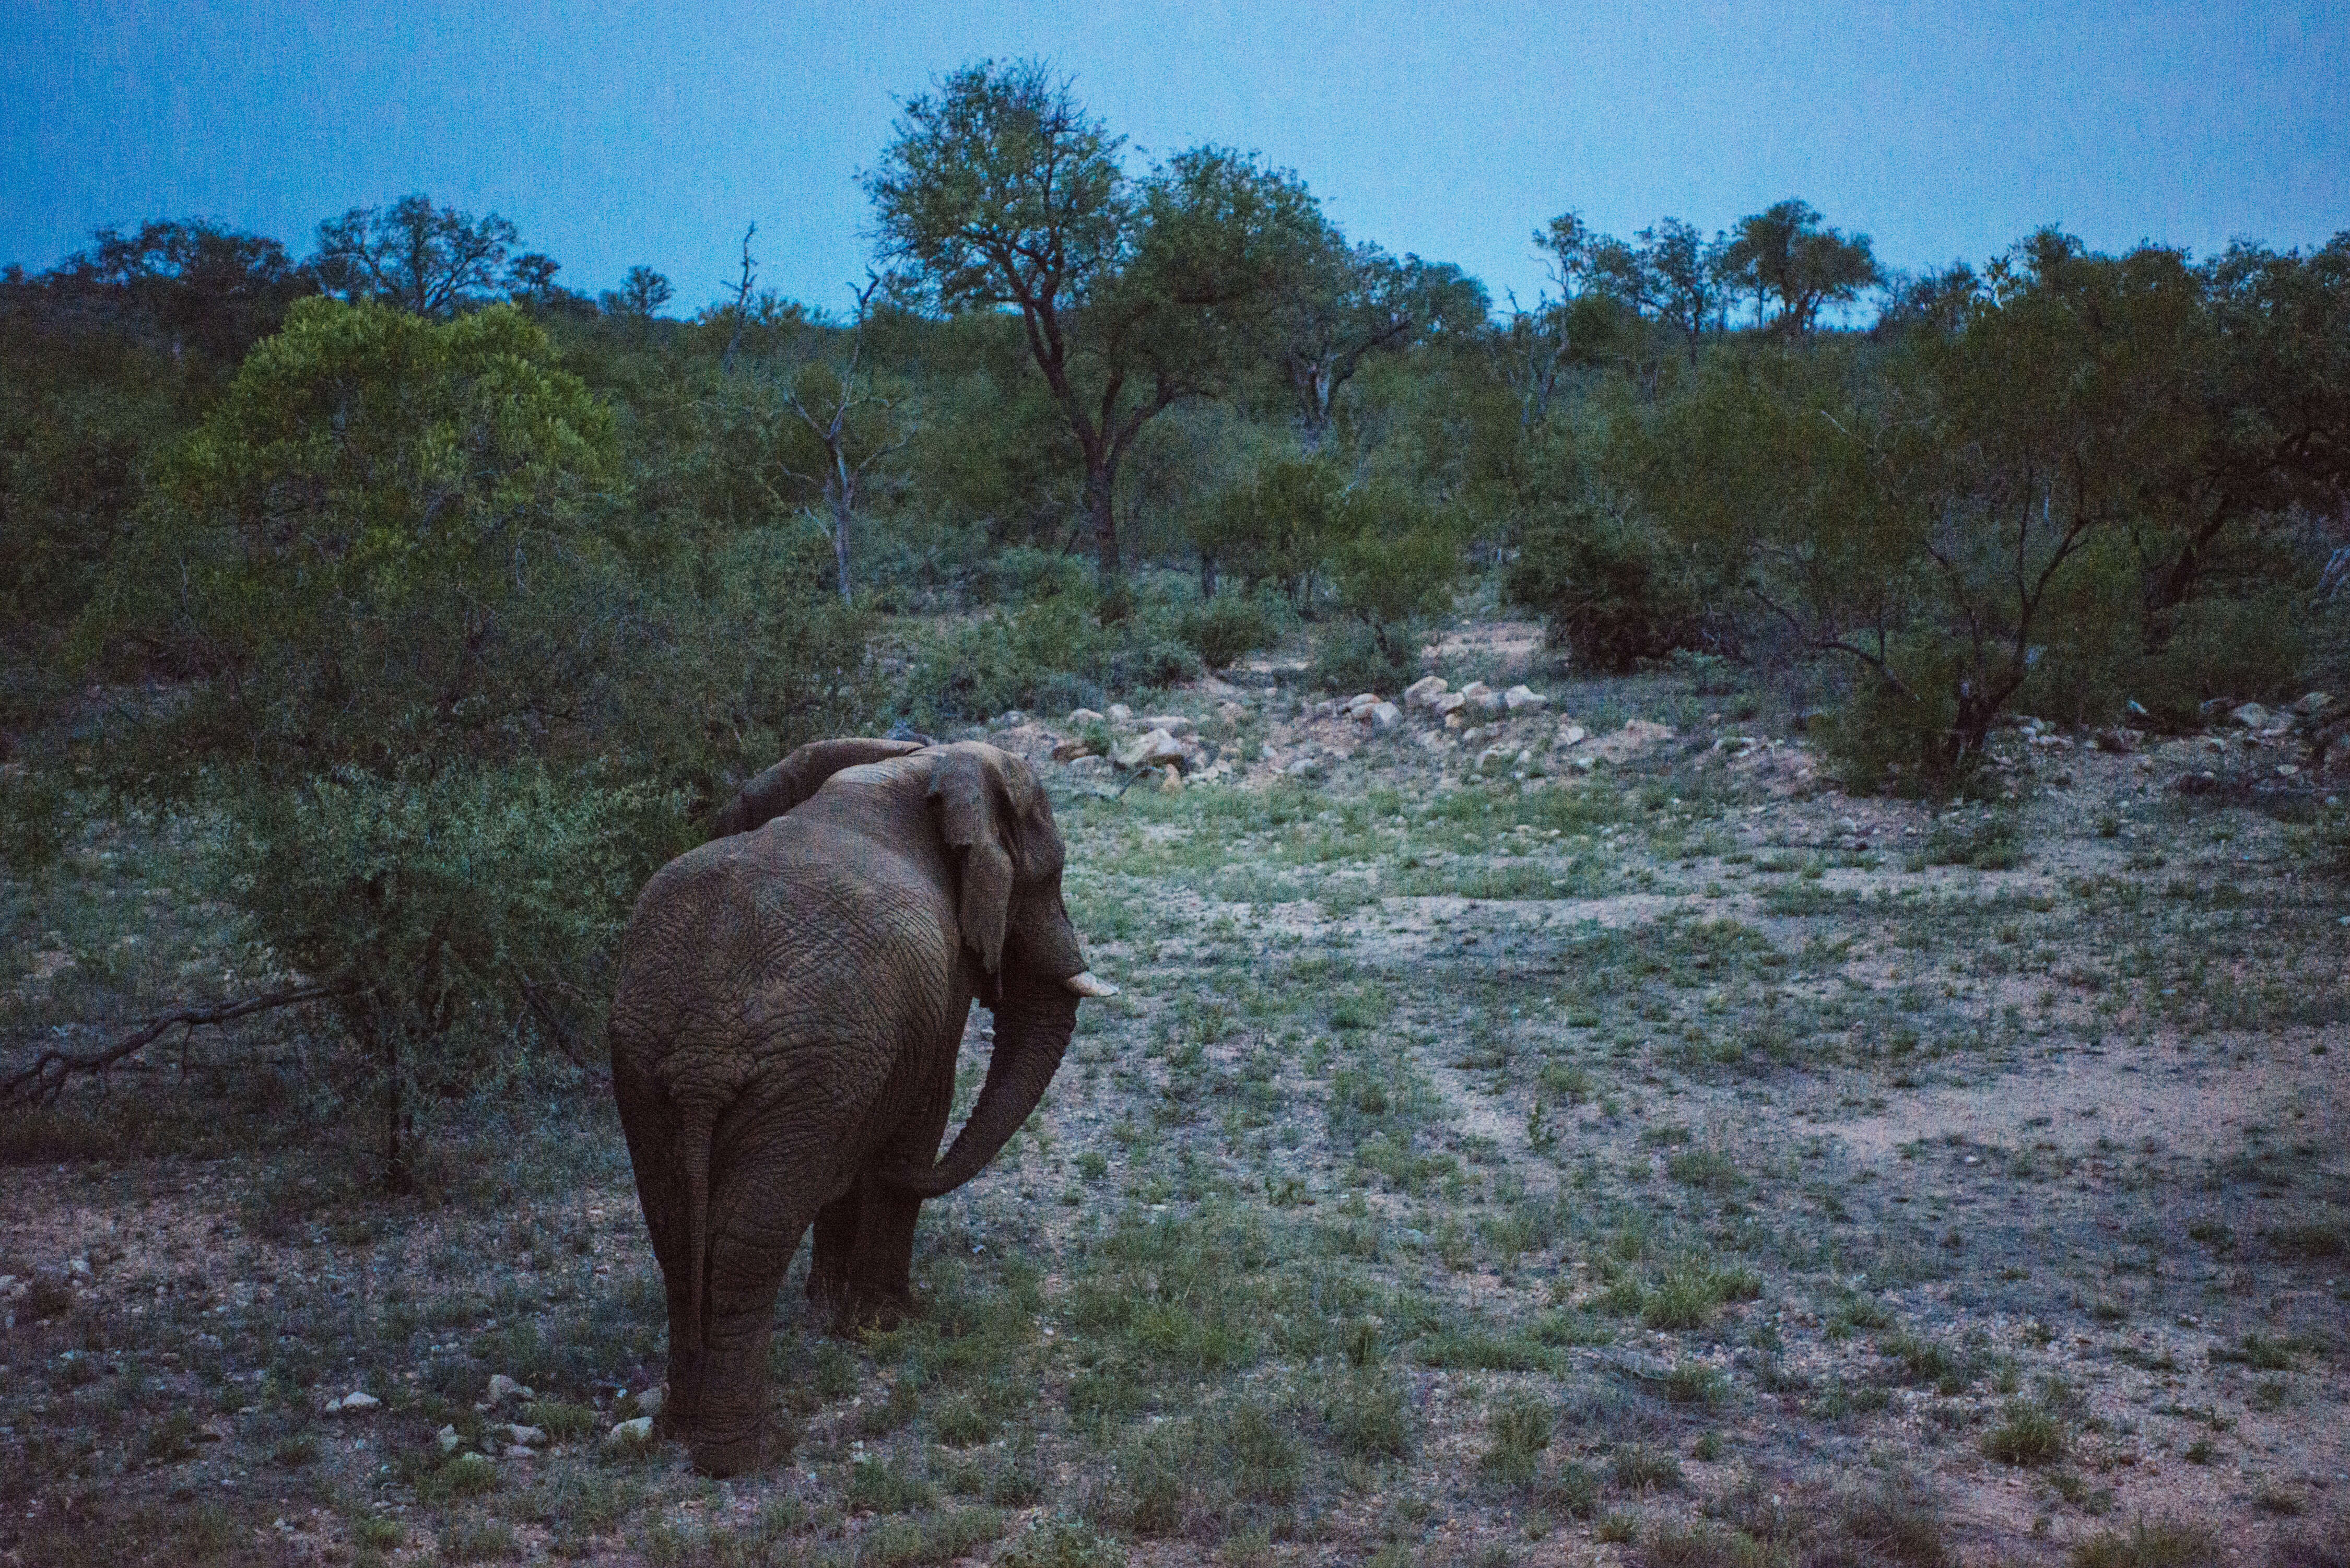 Elephant standing in the African savannah